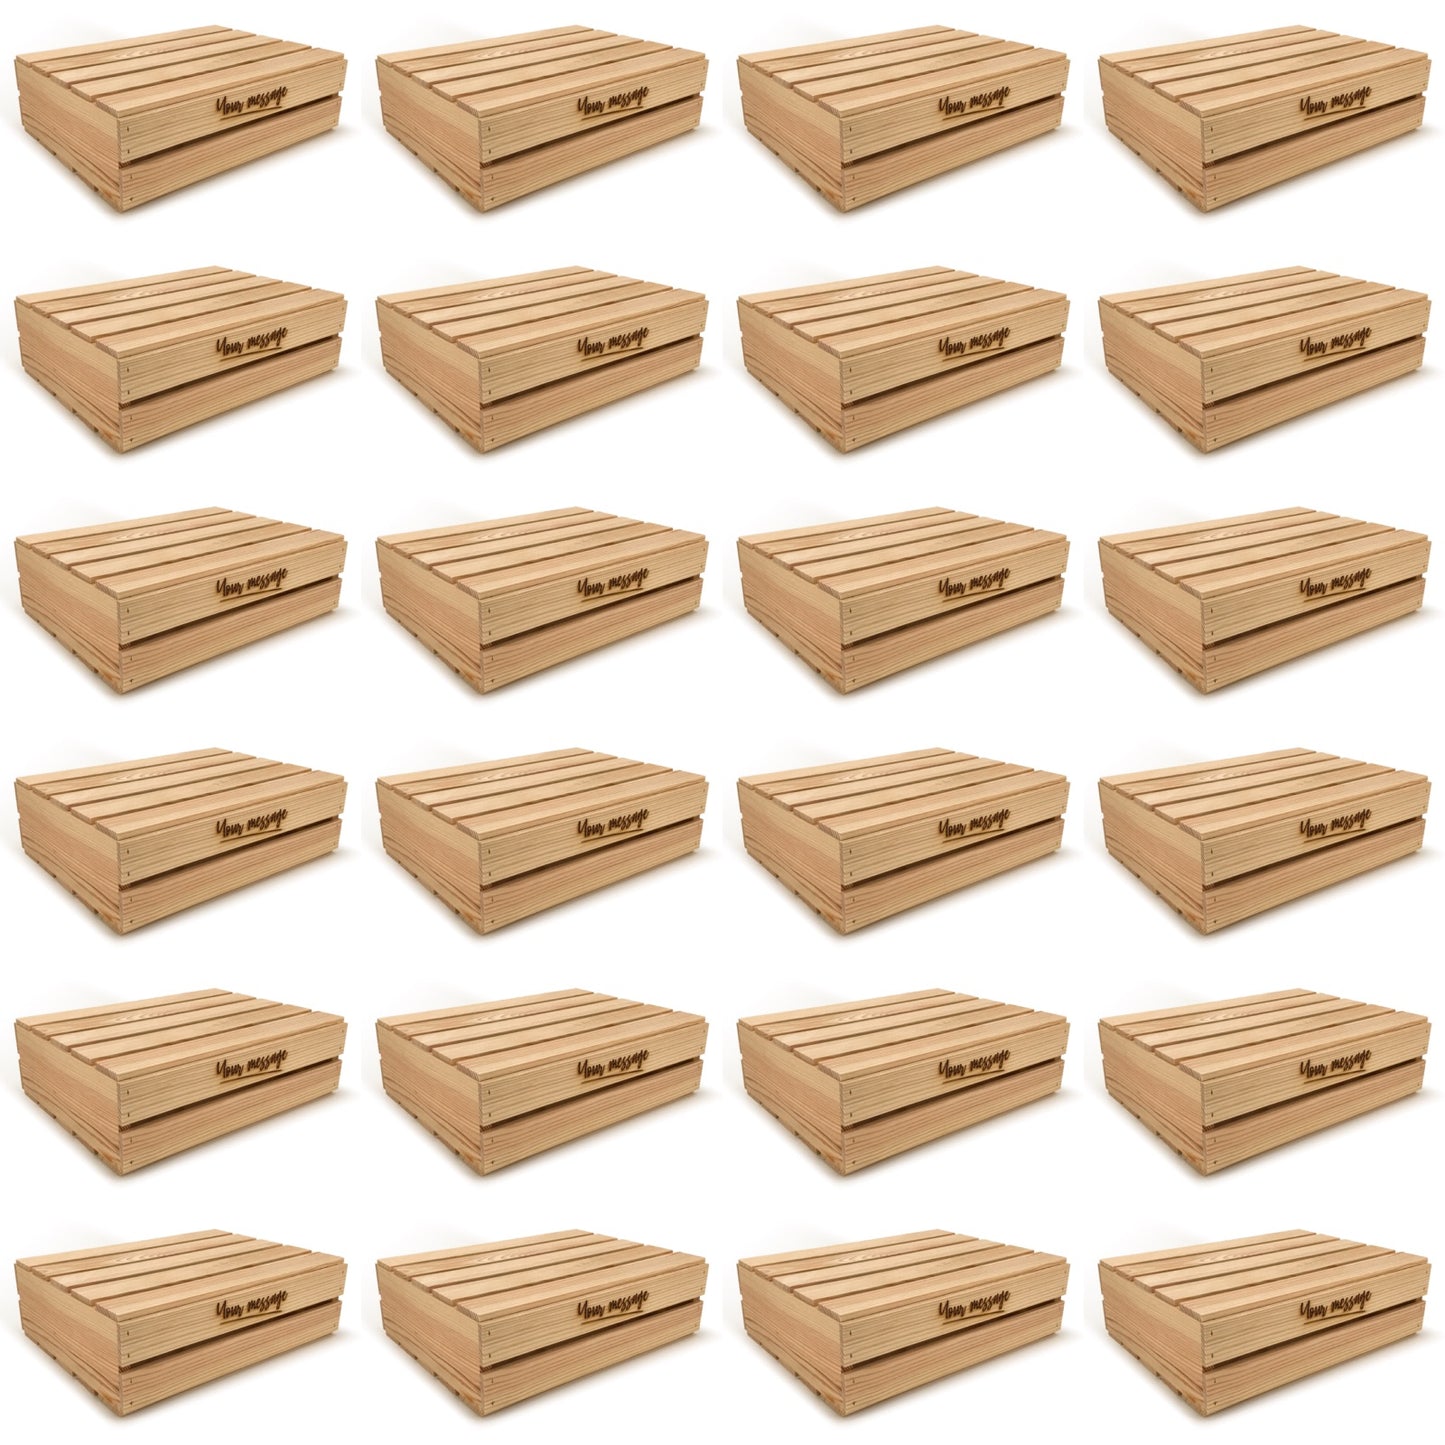 24 Small wooden crates with lid and custom message 18x14x5.25, 6-WS-18-14-5.25-ST-NW-LL, 12-WS-18-14-5.25-ST-NW-LL, 24-WS-18-14-5.25-ST-NW-LL, 48-WS-18-14-5.25-ST-NW-LL, 96-WS-18-14-5.25-ST-NW-LL